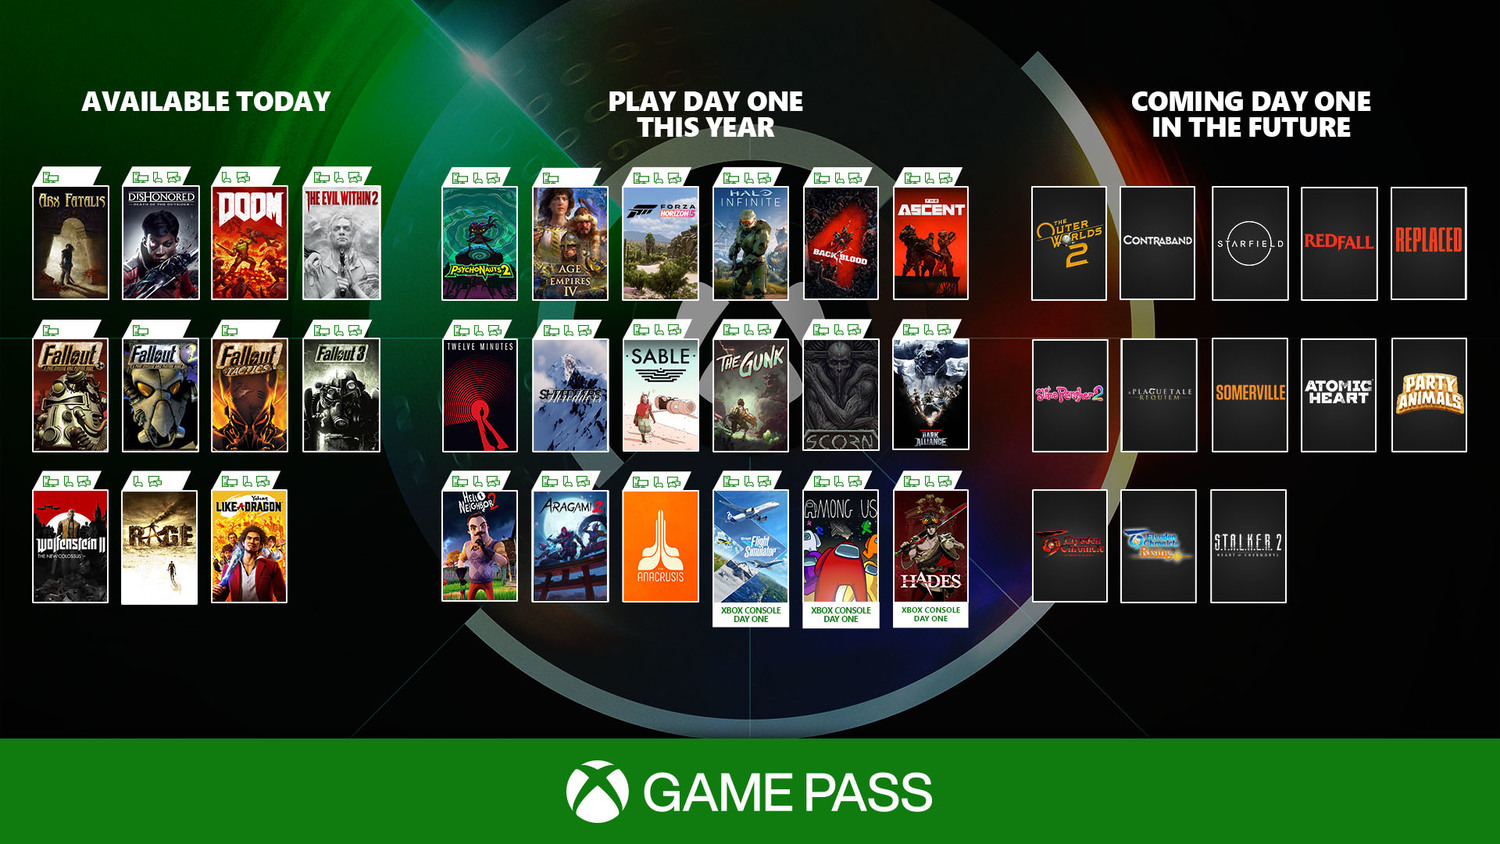 The Xbox Game Pass game library lineup is getting stronger. Figure: Reposted from Xbox twitter